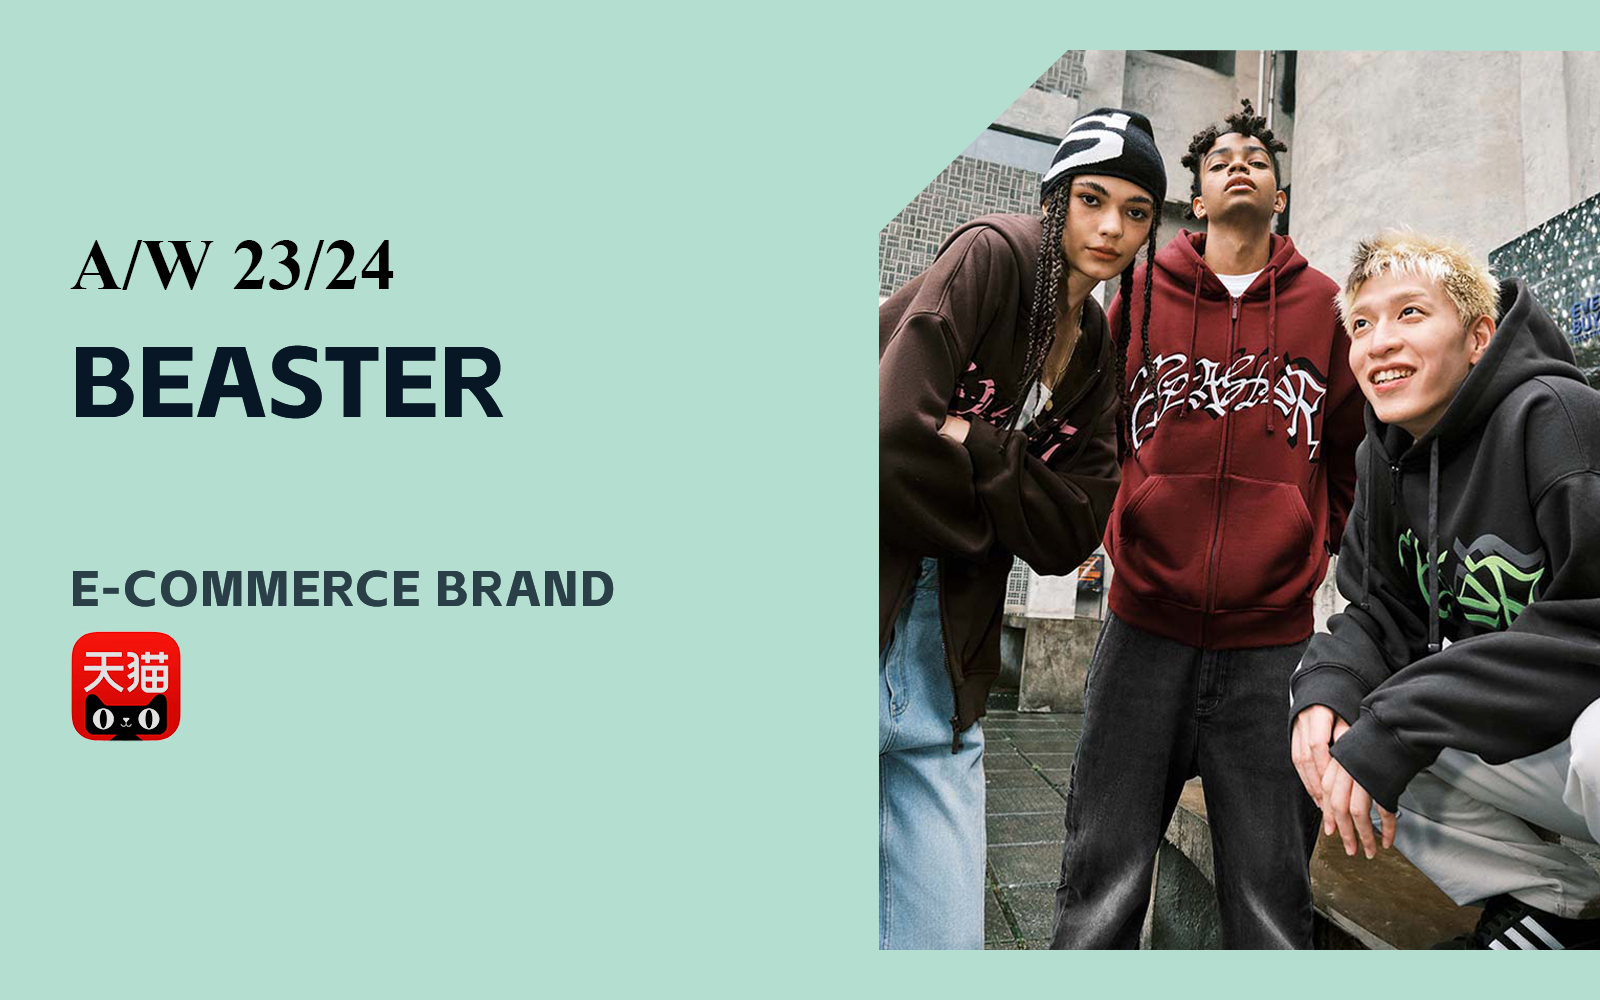 Cool Street Fashion -- The Analysis of BEASTER The Benchmark E-commerce Menswear Brand